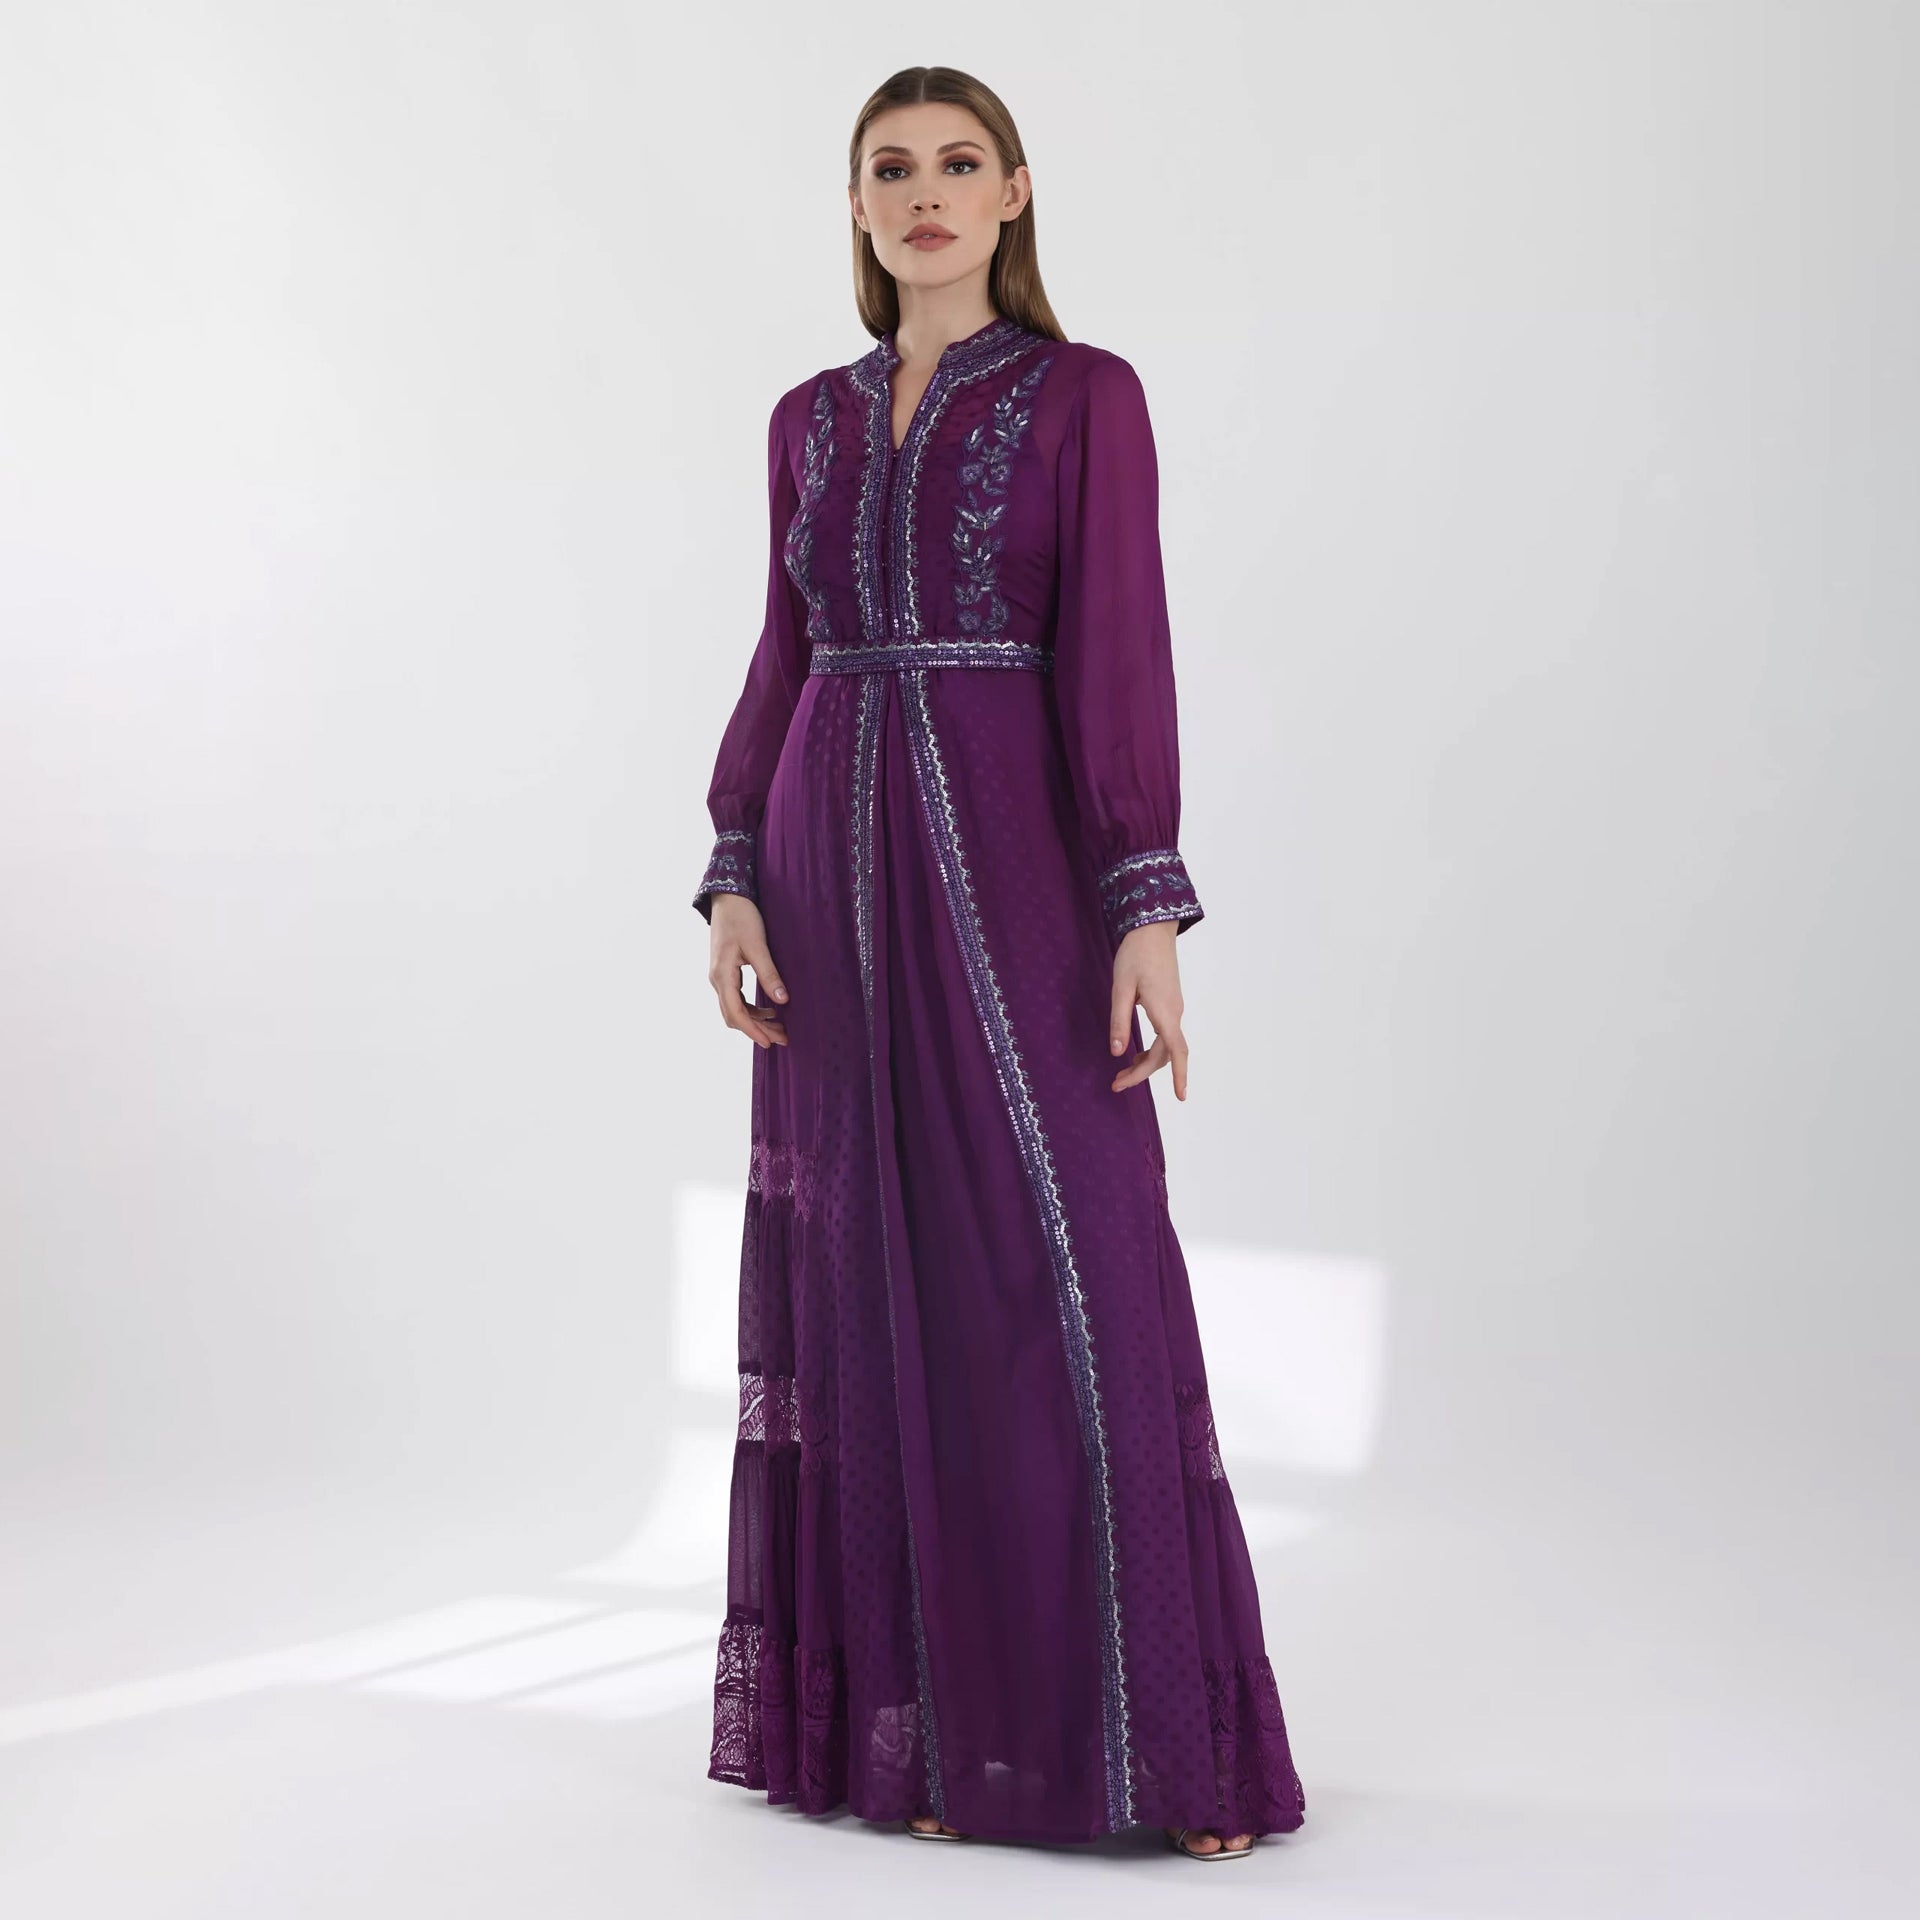 Purple Dress With Long Sleeves and Silver Embroidery From Shalky